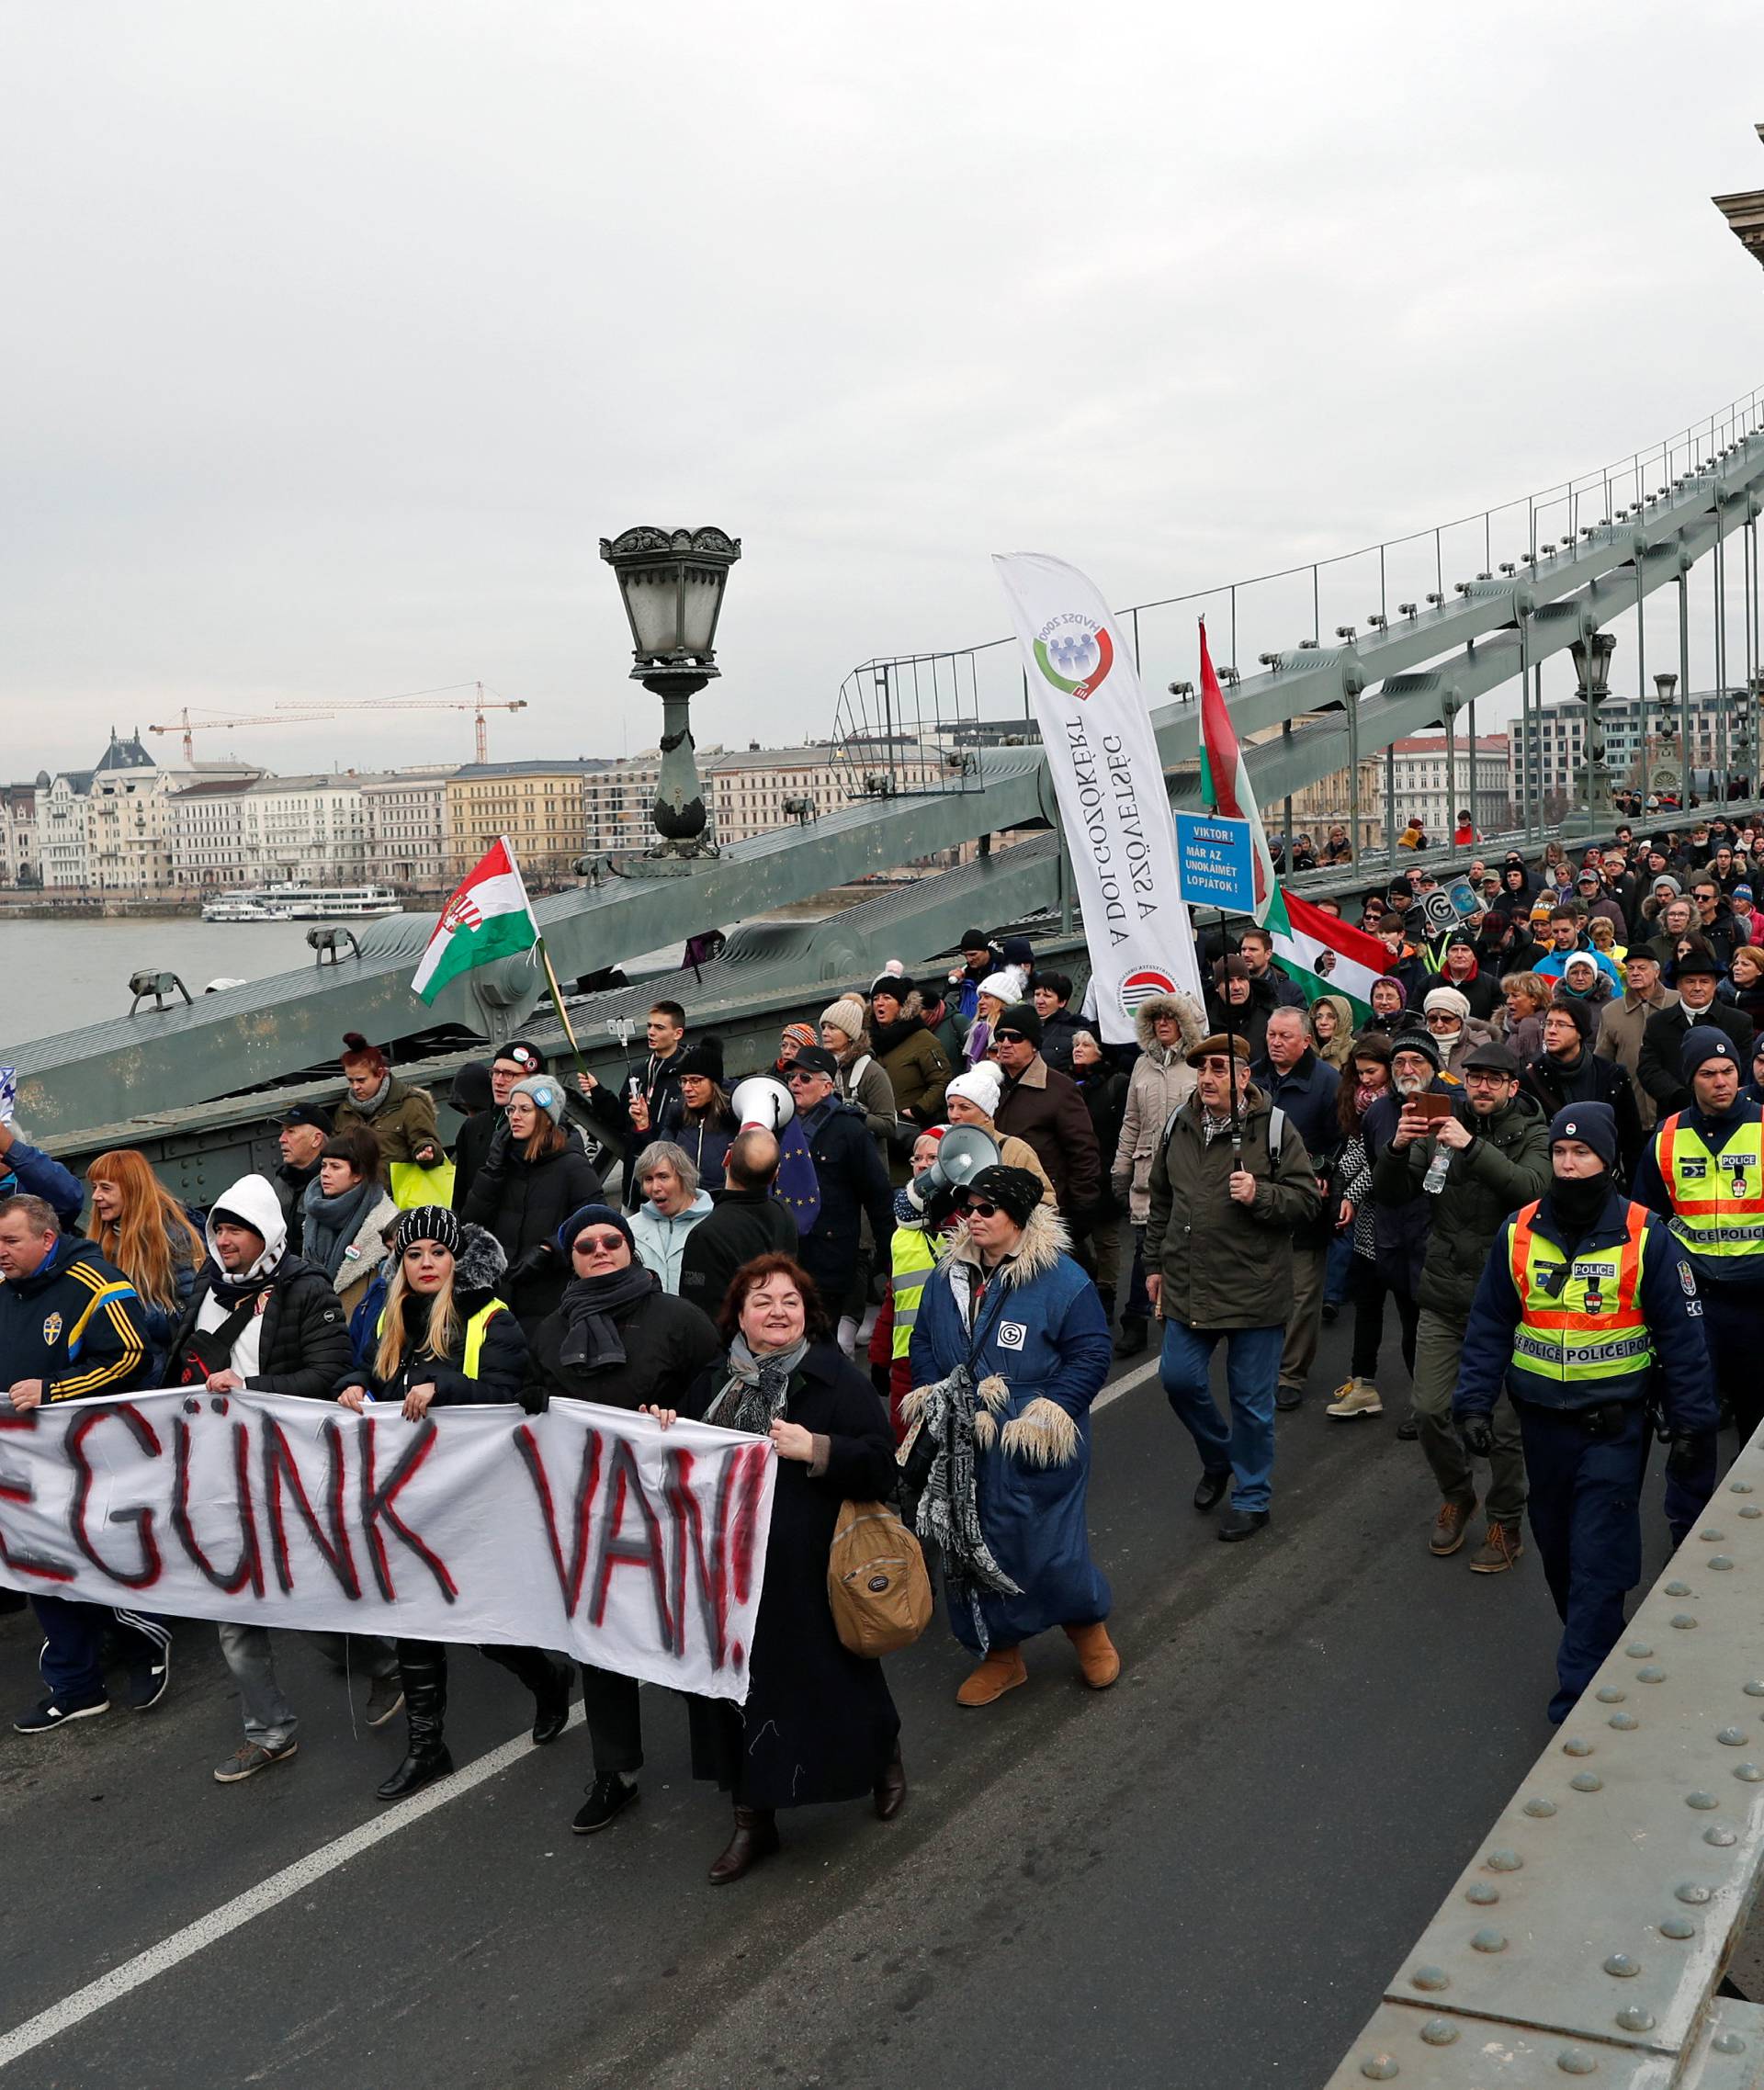 People take part in a protest against a proposed new labor law, billed as the "slave law", in Budapest